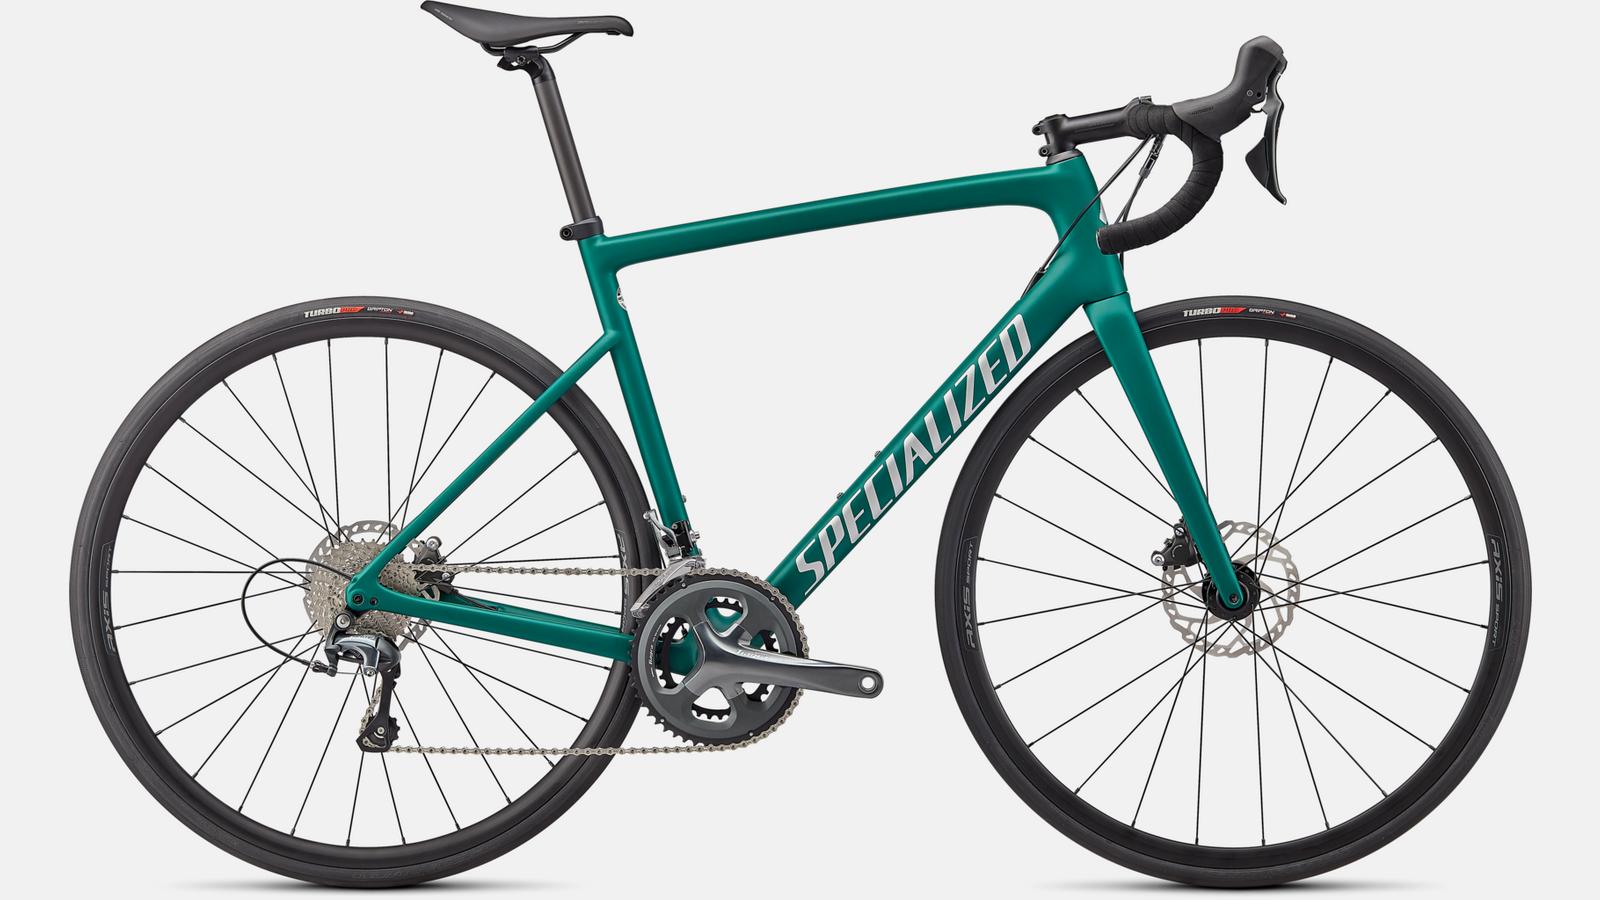 Paint for 2022 Specialized Tarmac SL6 - Gloss Pine Green